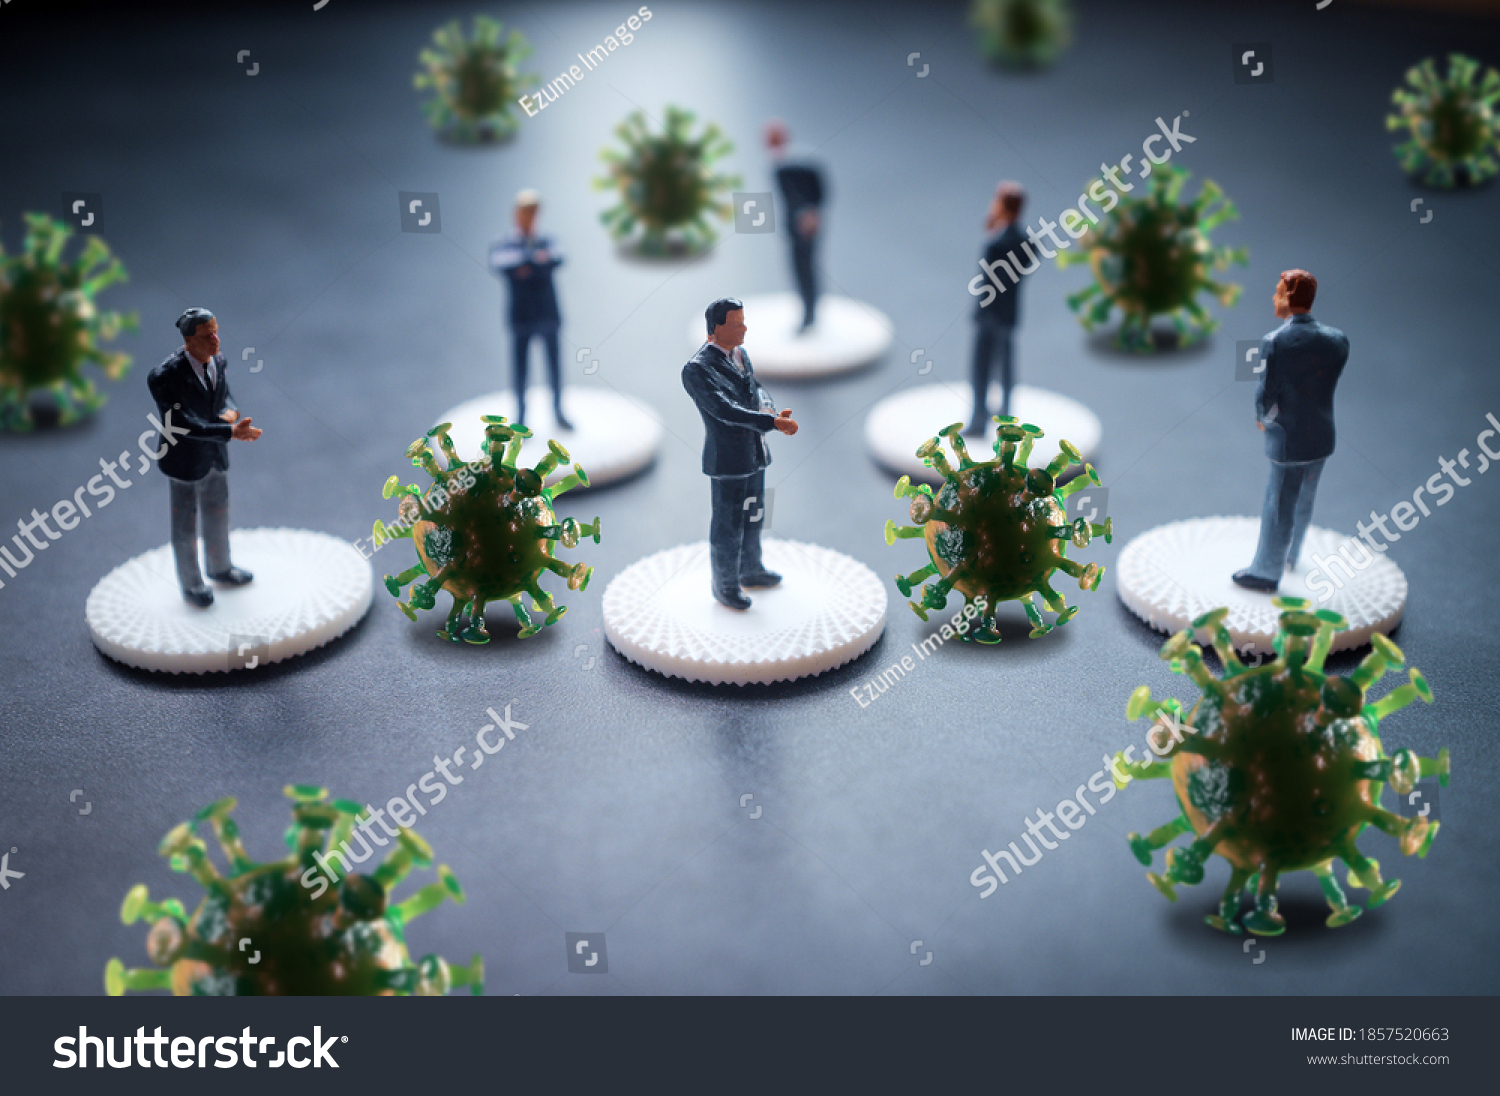 Miniature businessmen practicing social distancing to slow the spread of the deadly coronavirus #1857520663